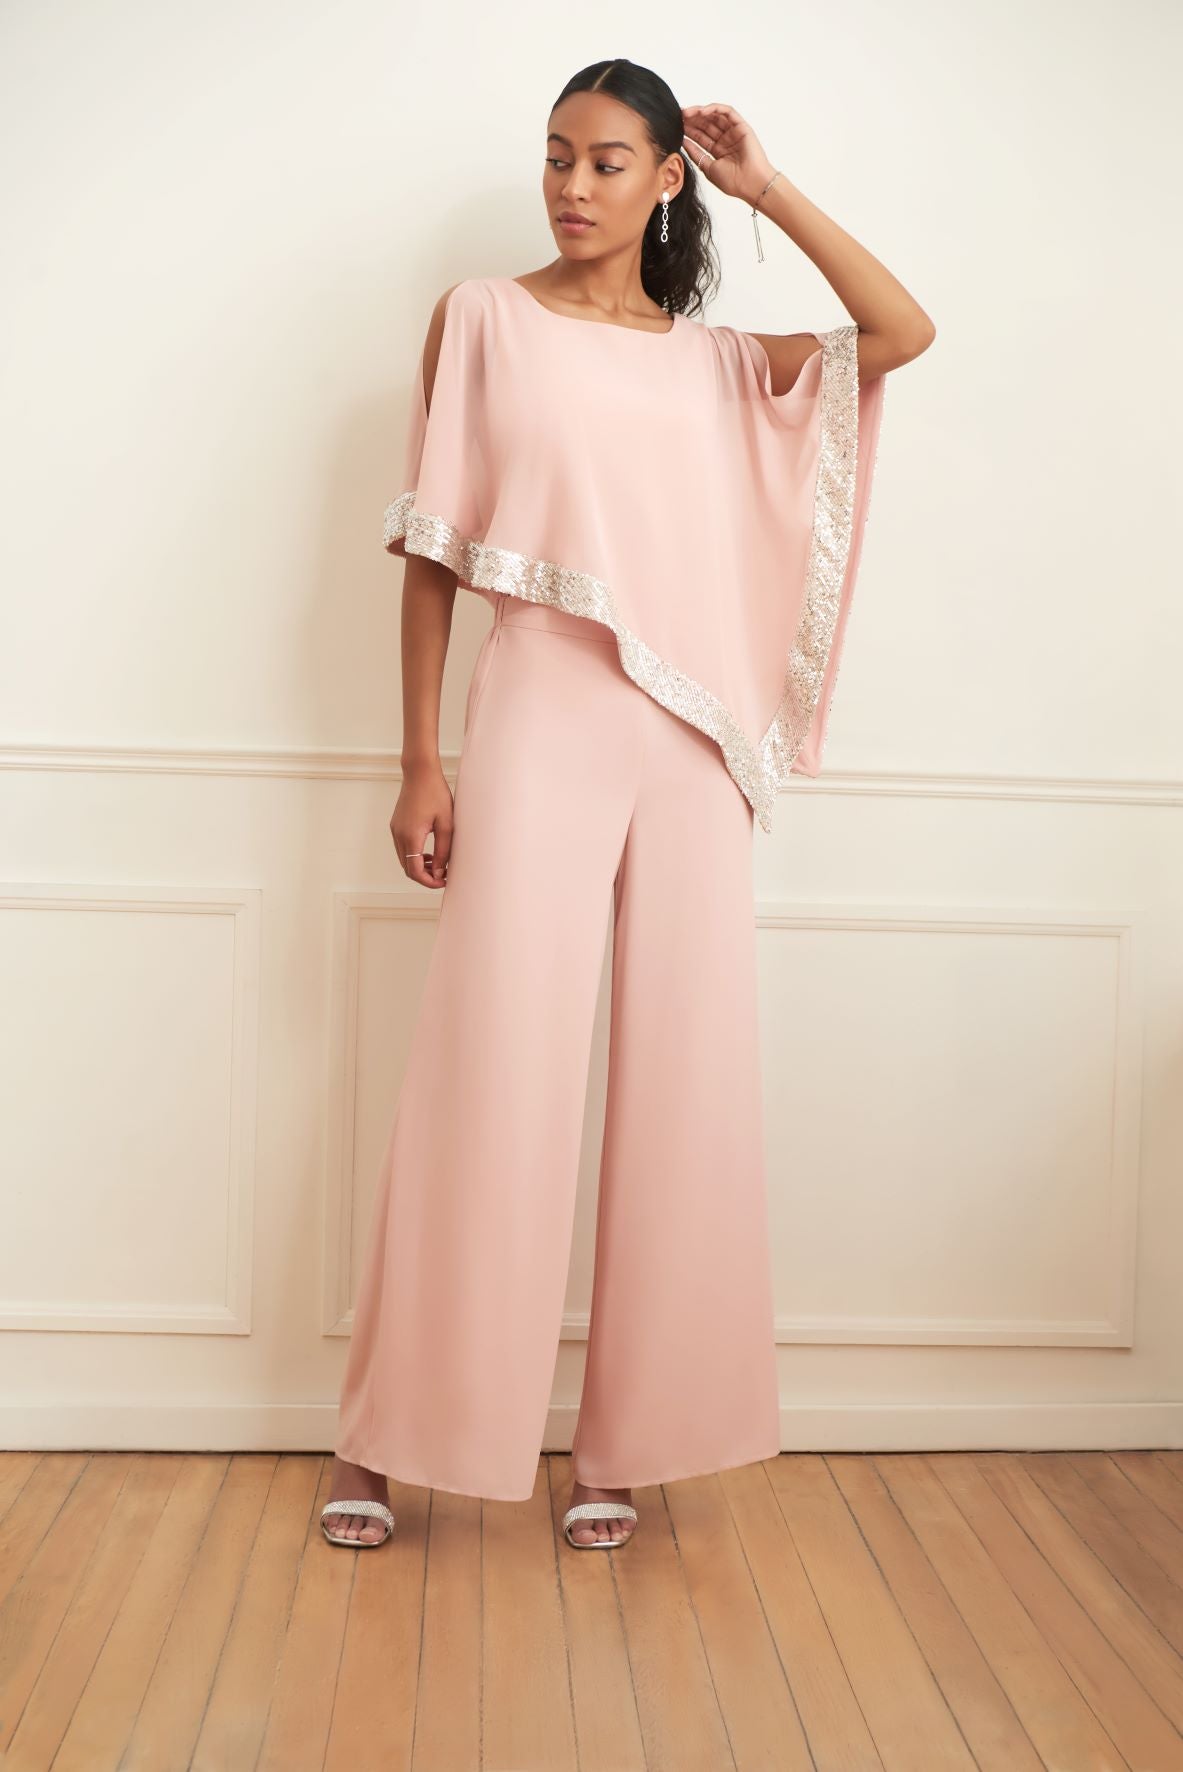 Soft Pastel Pink Silky Knit Tunic  221346 - After Hours Boutique